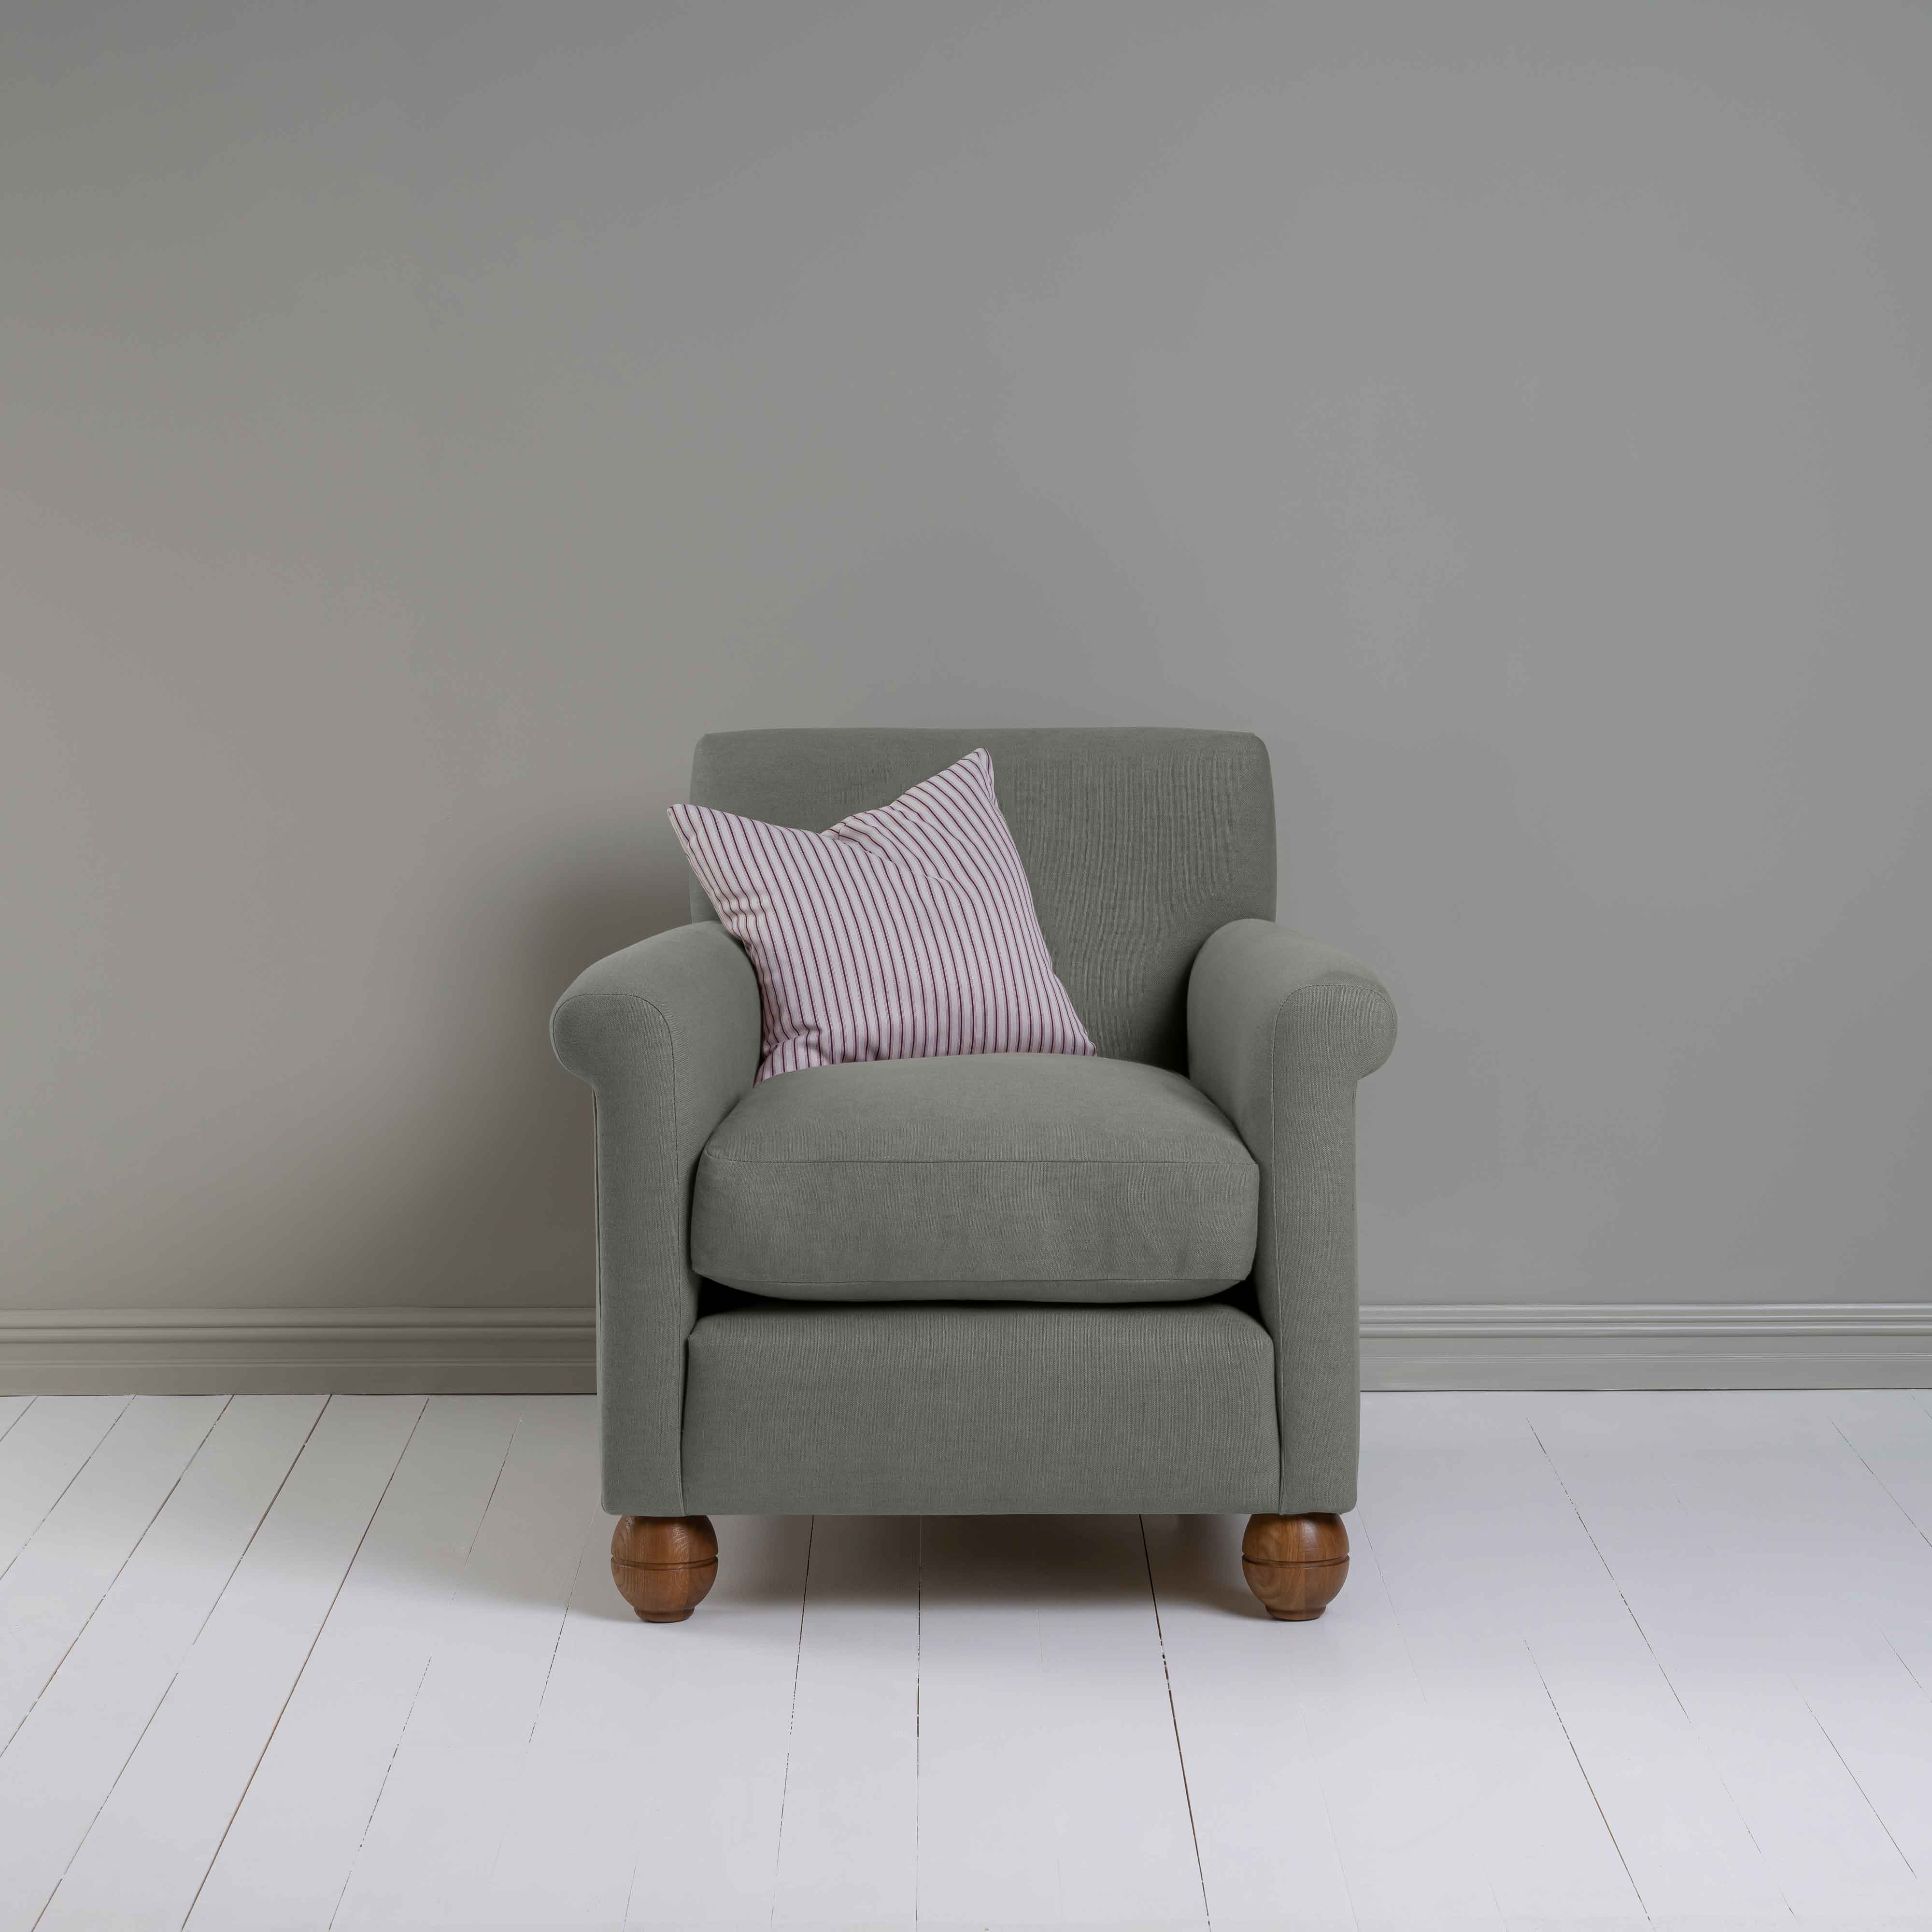  Idler Armchair in Laidback Linen Shadow 